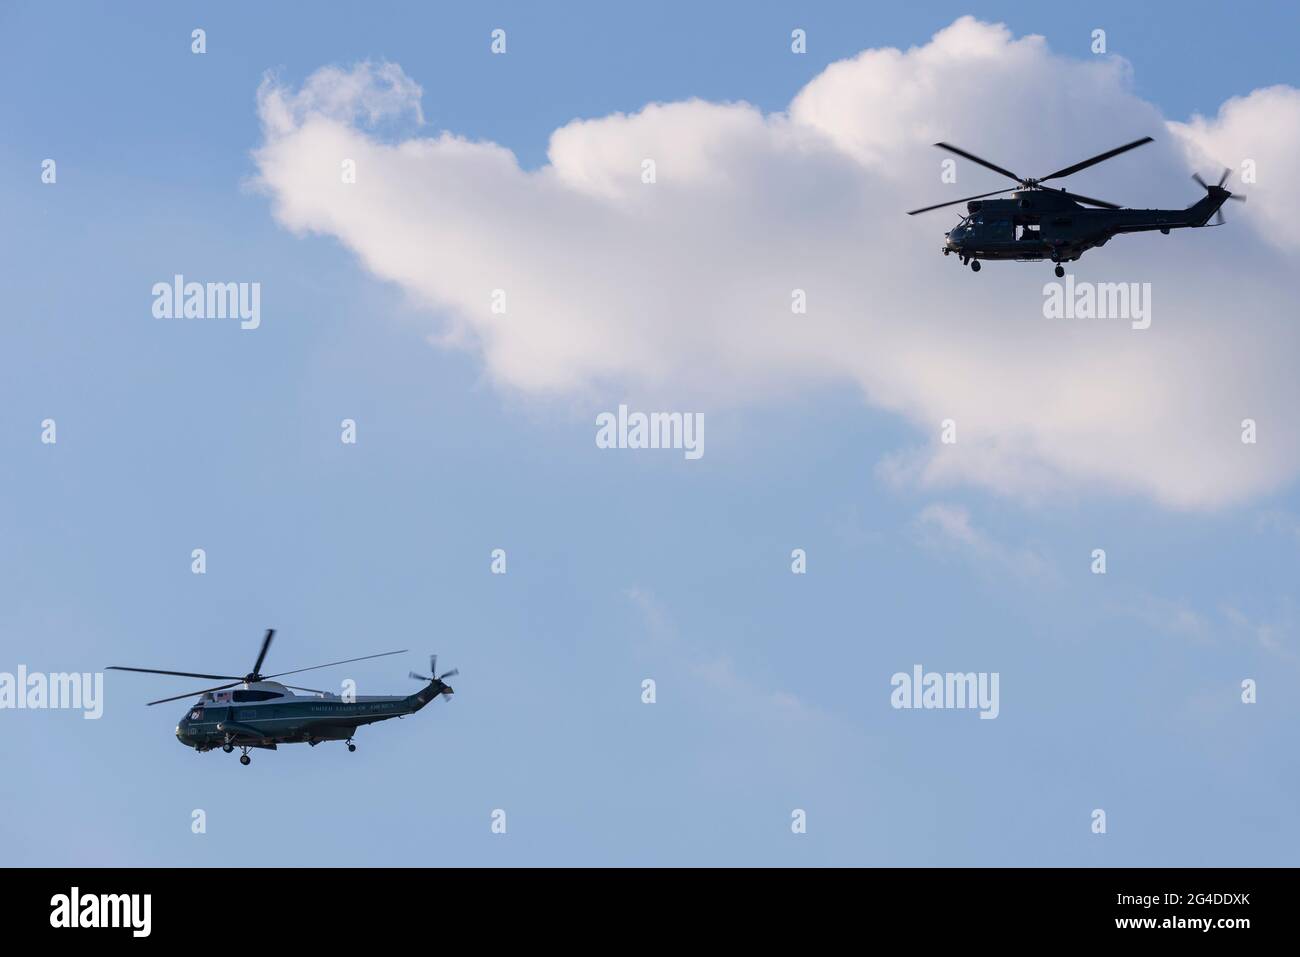 US president Joe Biden arriving back at Heathrow Airport in Sea King helicopter callsign Marine One escorted by RAF Puma military security. Stock Photo